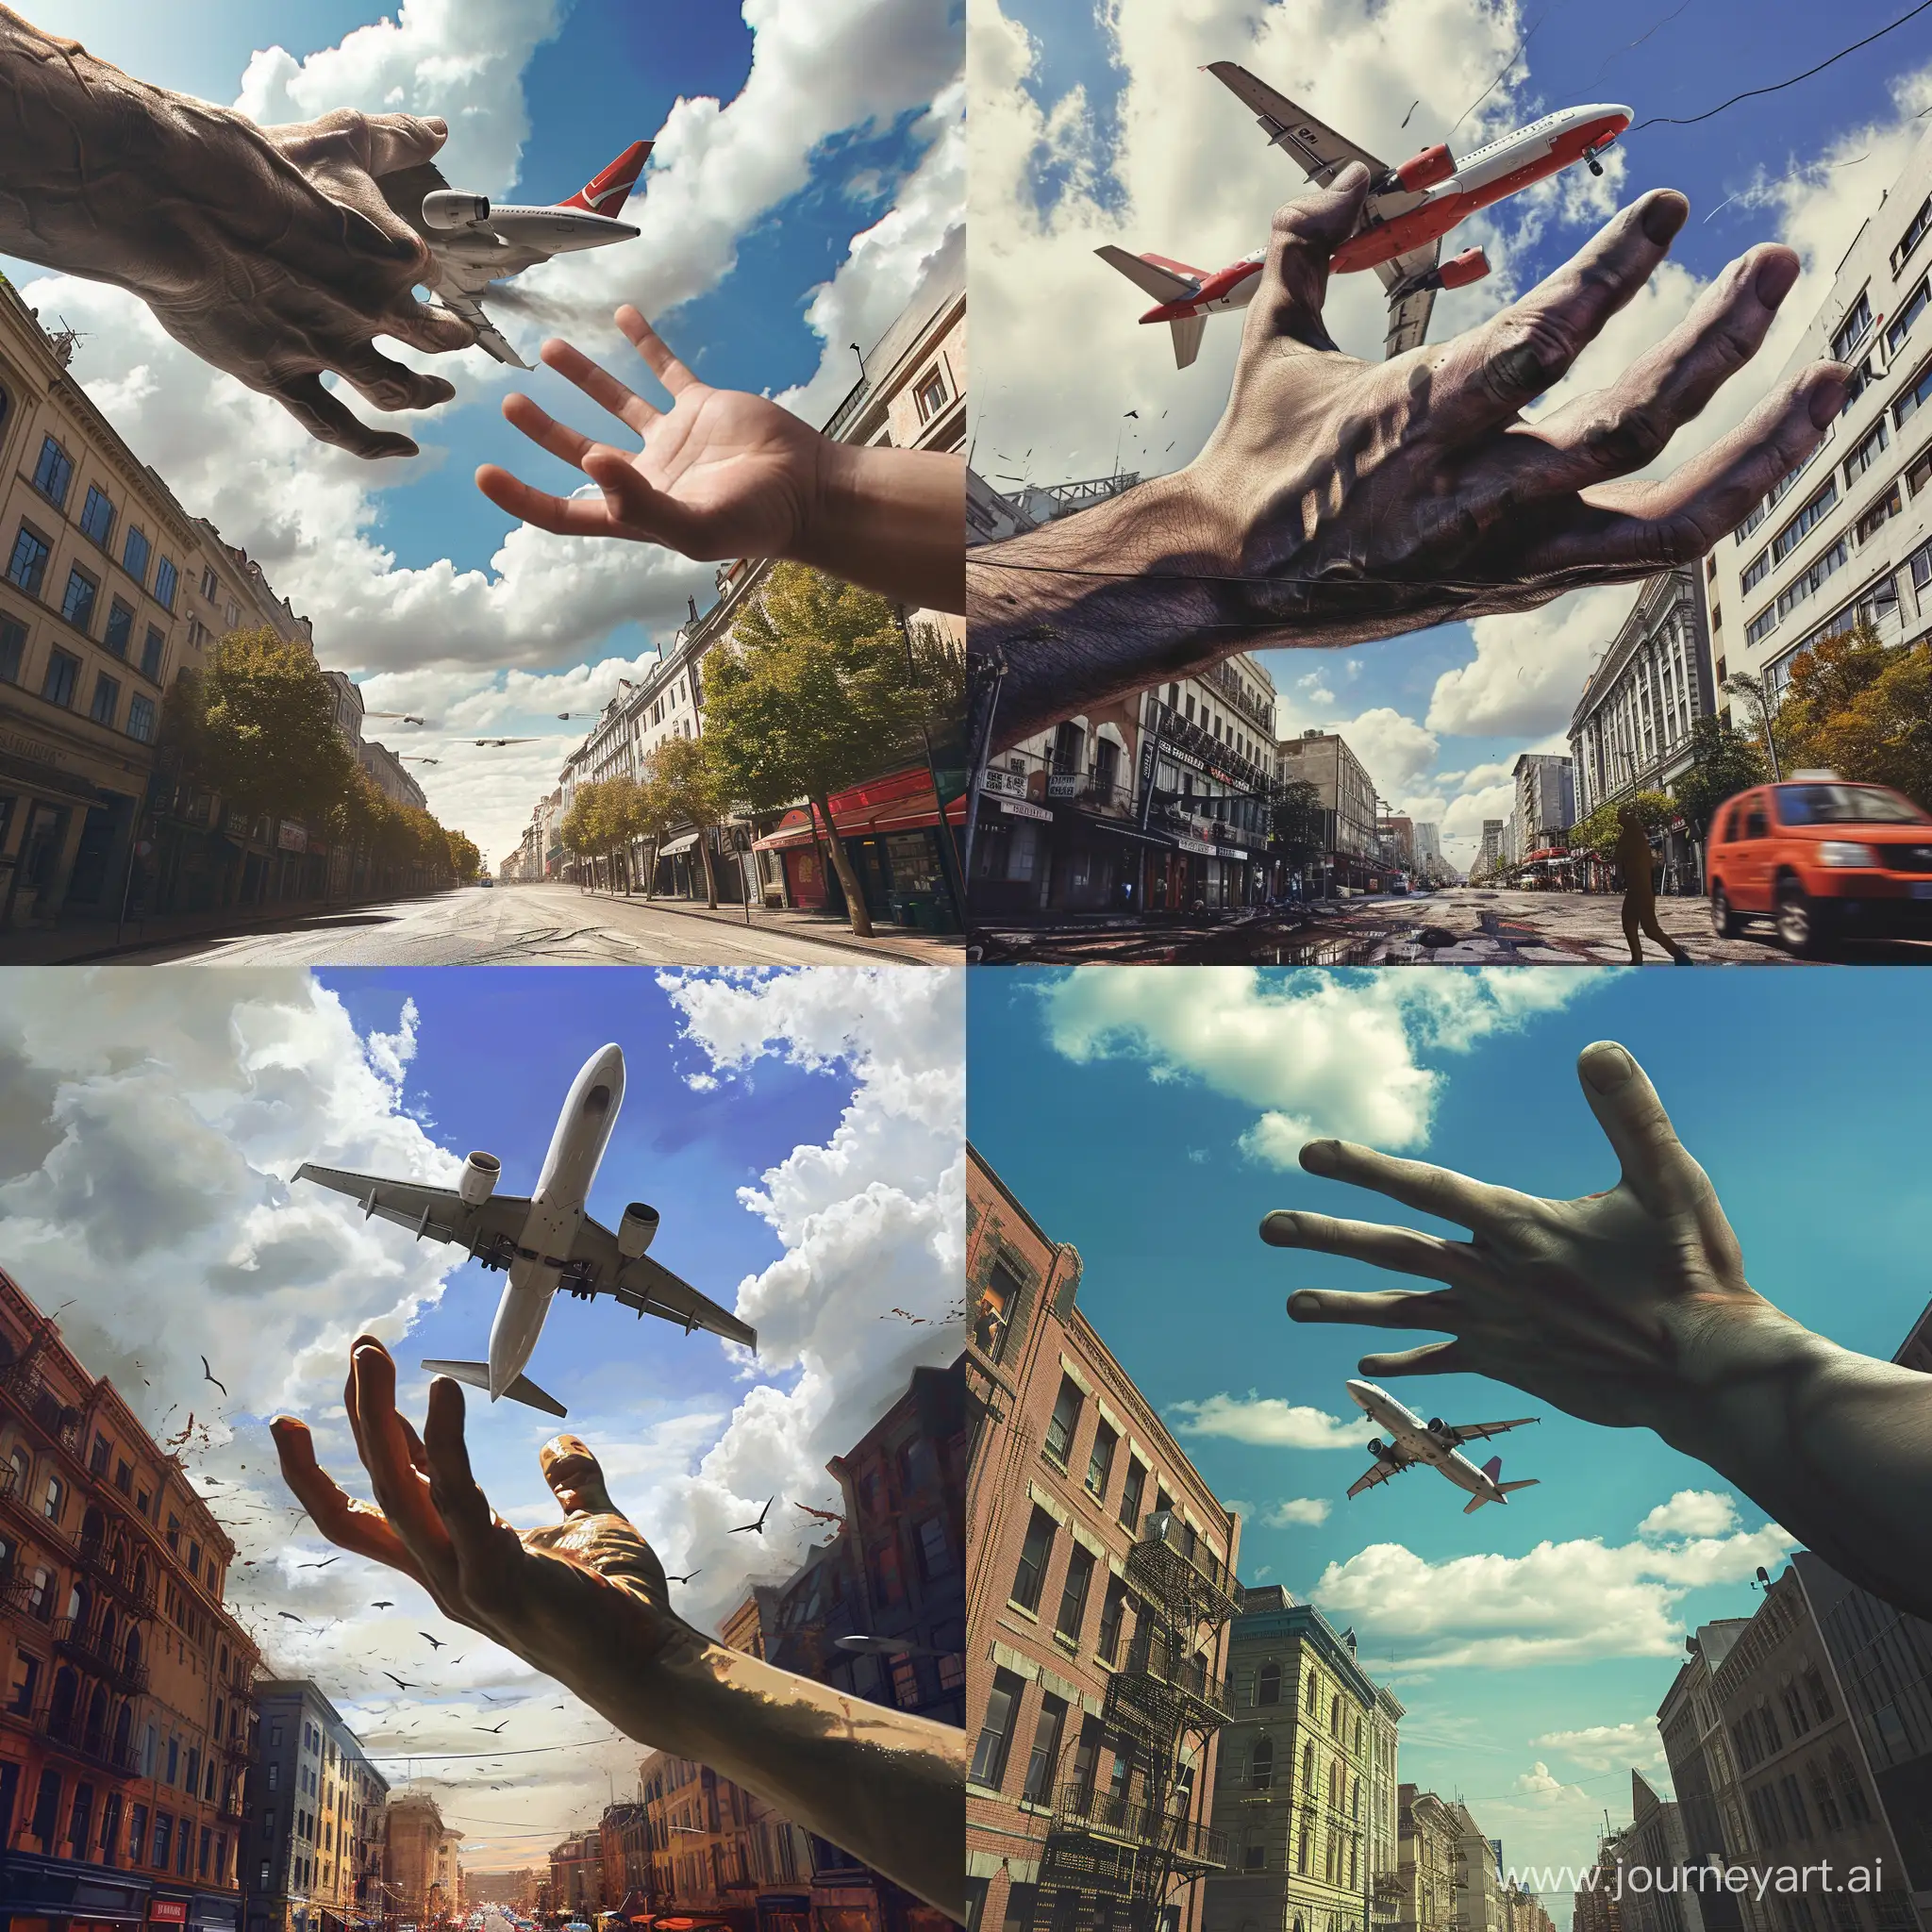 Impressive-Street-View-Capture-Giant-Hand-Swiping-Plane-from-the-Sky